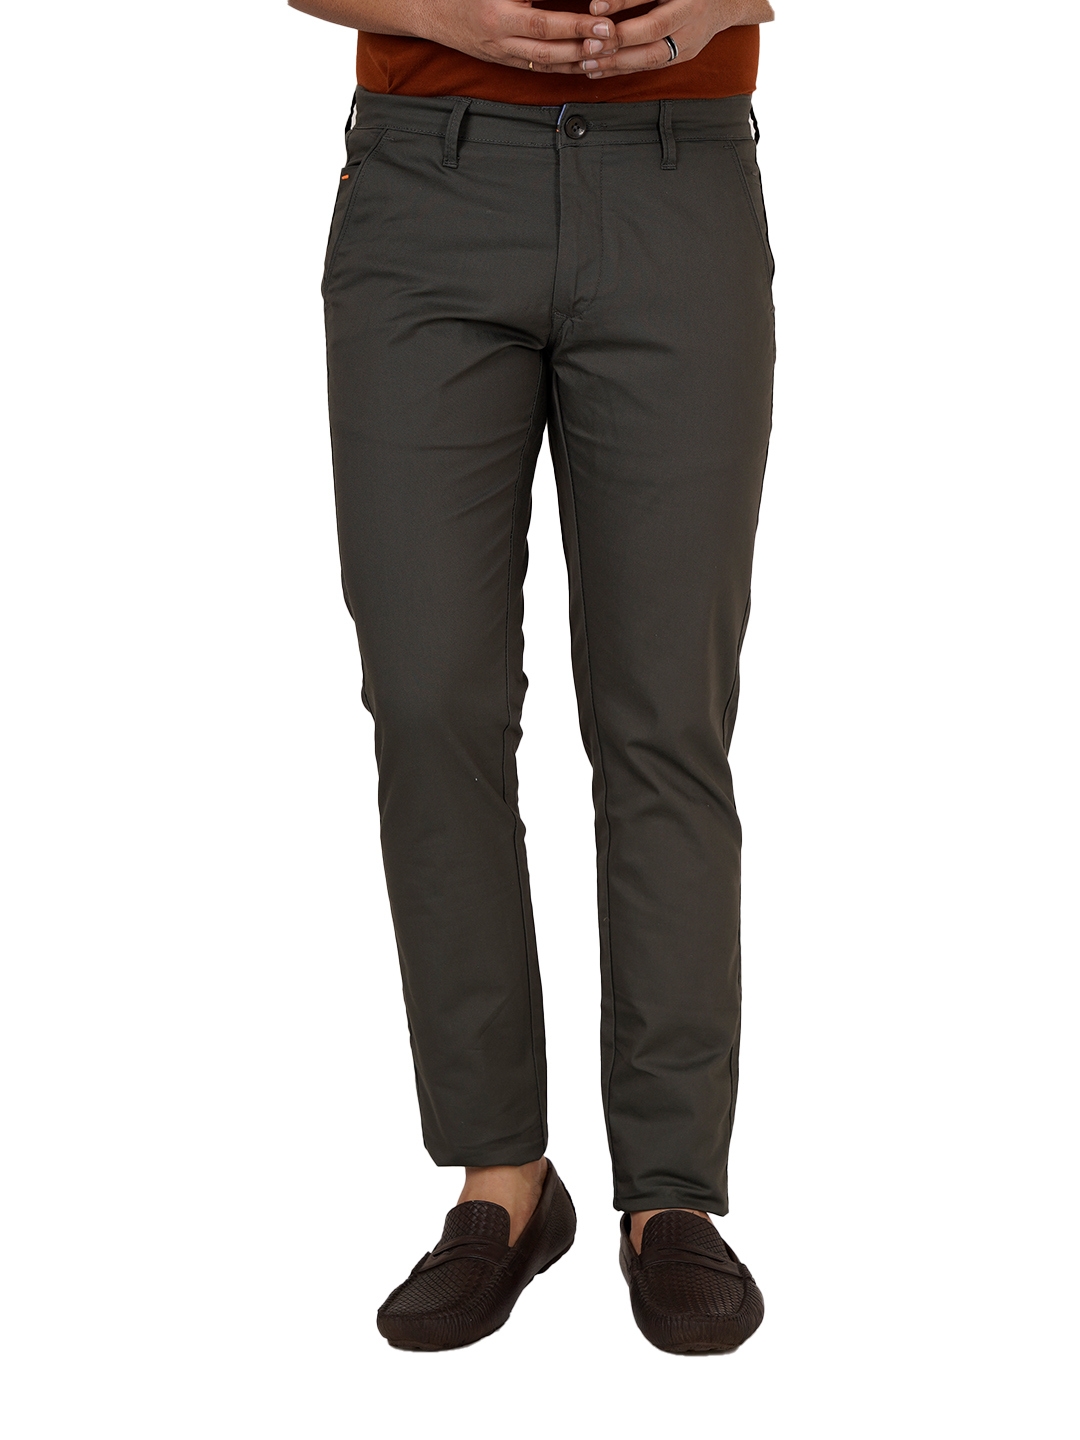 D'cot by Donear Men's Grey Cotton Trousers